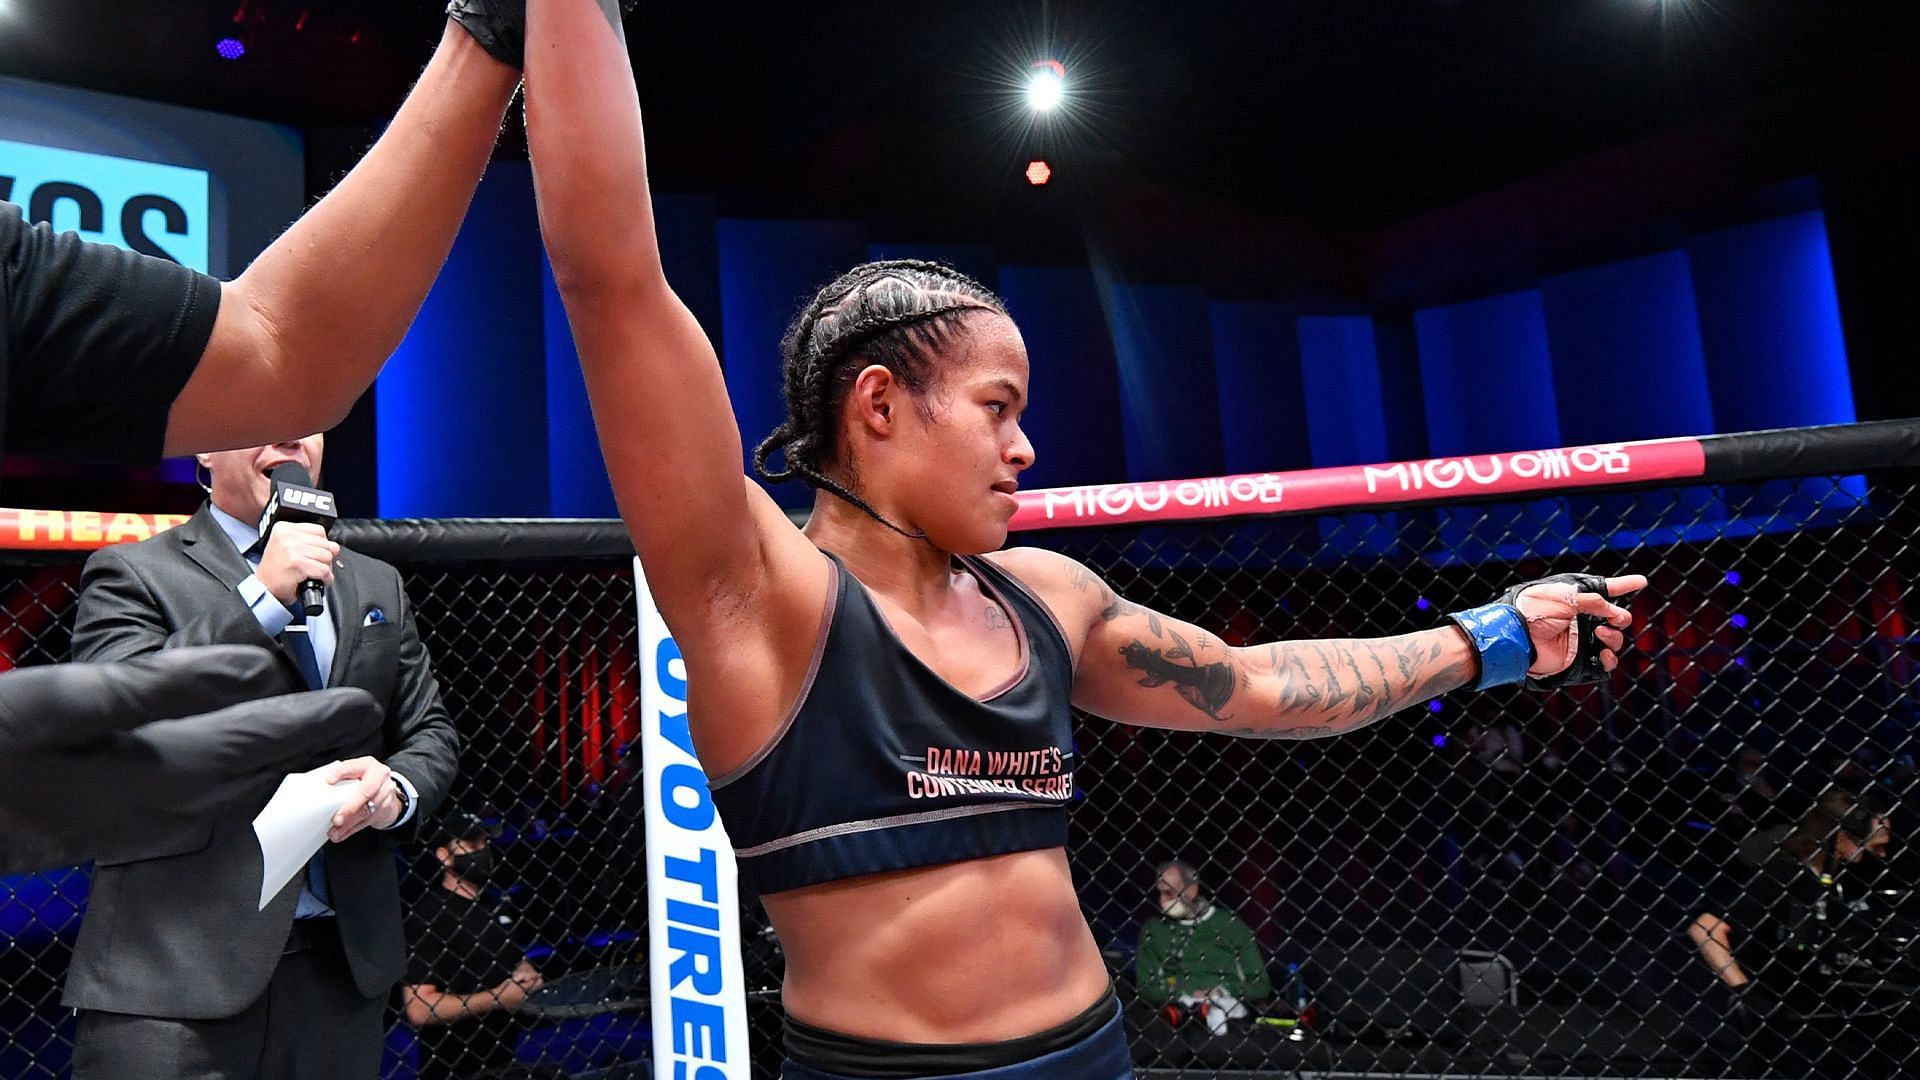 Karine Silva was impressive in her official octagon debut, defeating Poliana Botelho via submission